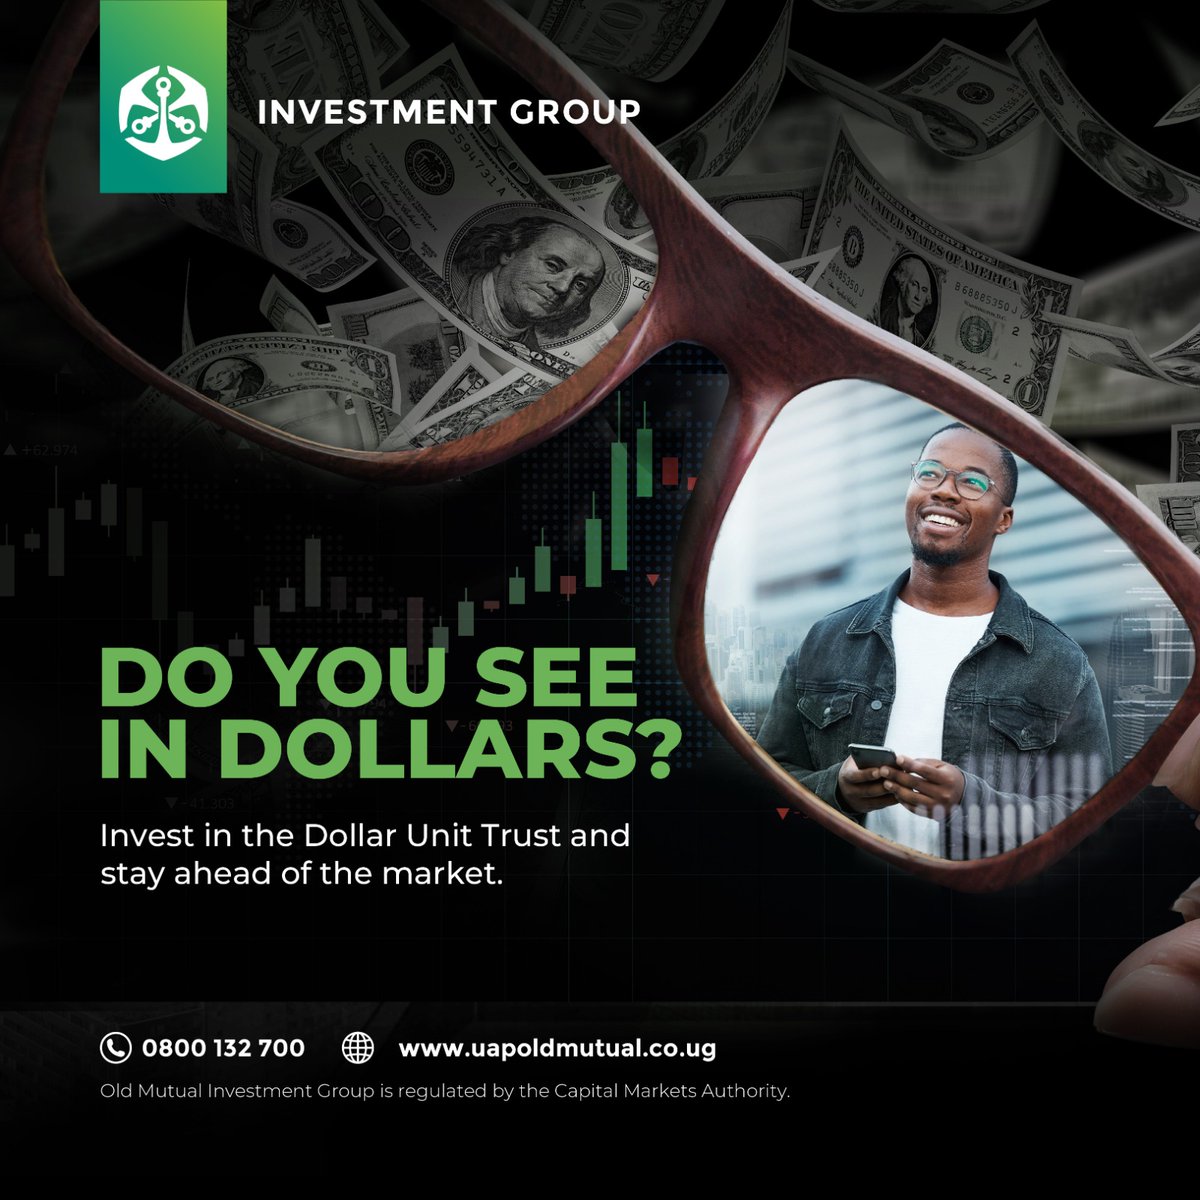 The Dollar Unit Trust Fund provides a convenient opportunity to invest your dollar funds alongside the investors in various financial instructions such as bonds and dollar notes. #TutambuleFfena
#DollarUnitTrust